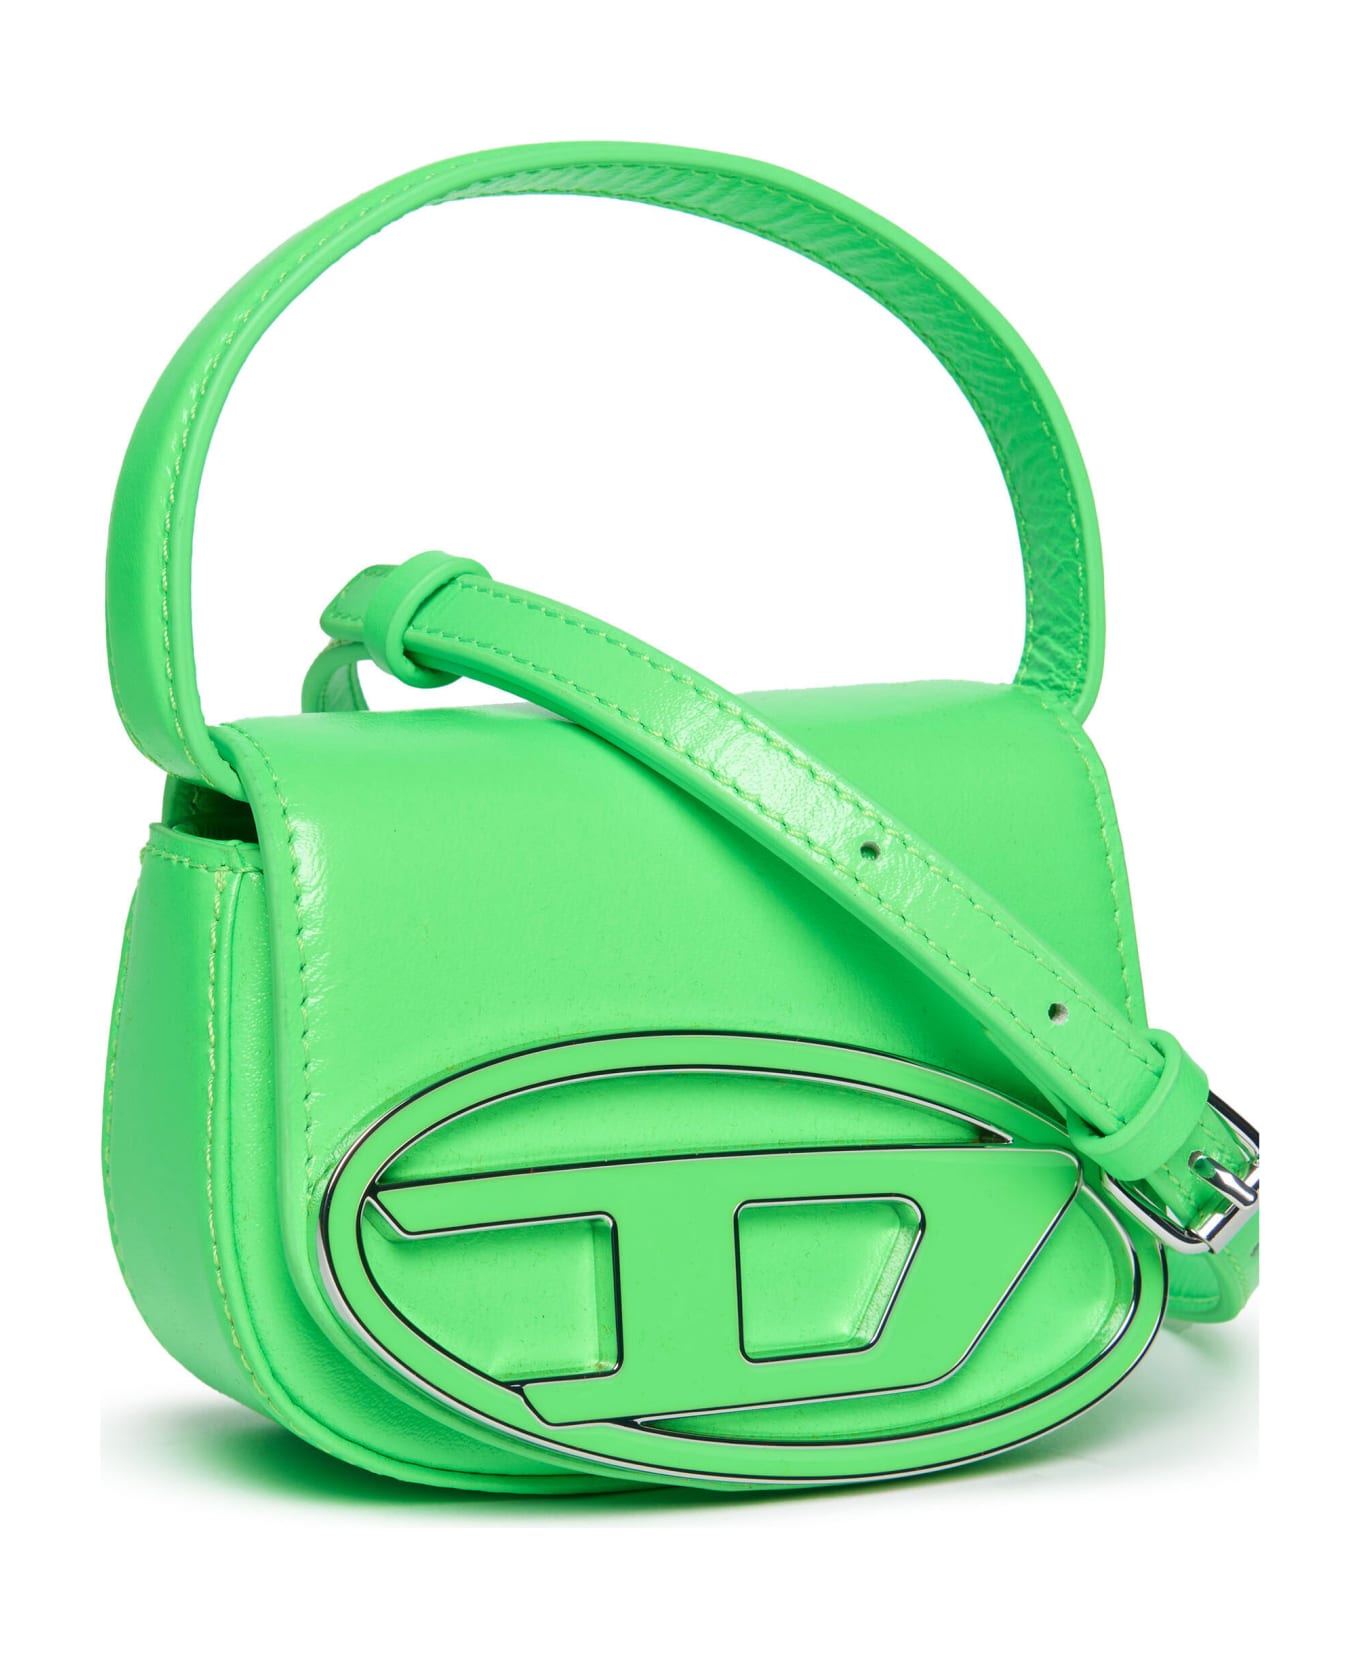 Diesel 1dr Xs Bags Diesel 1dr Xs Bag In Fluo Imitation Leather アクセサリー＆ギフト